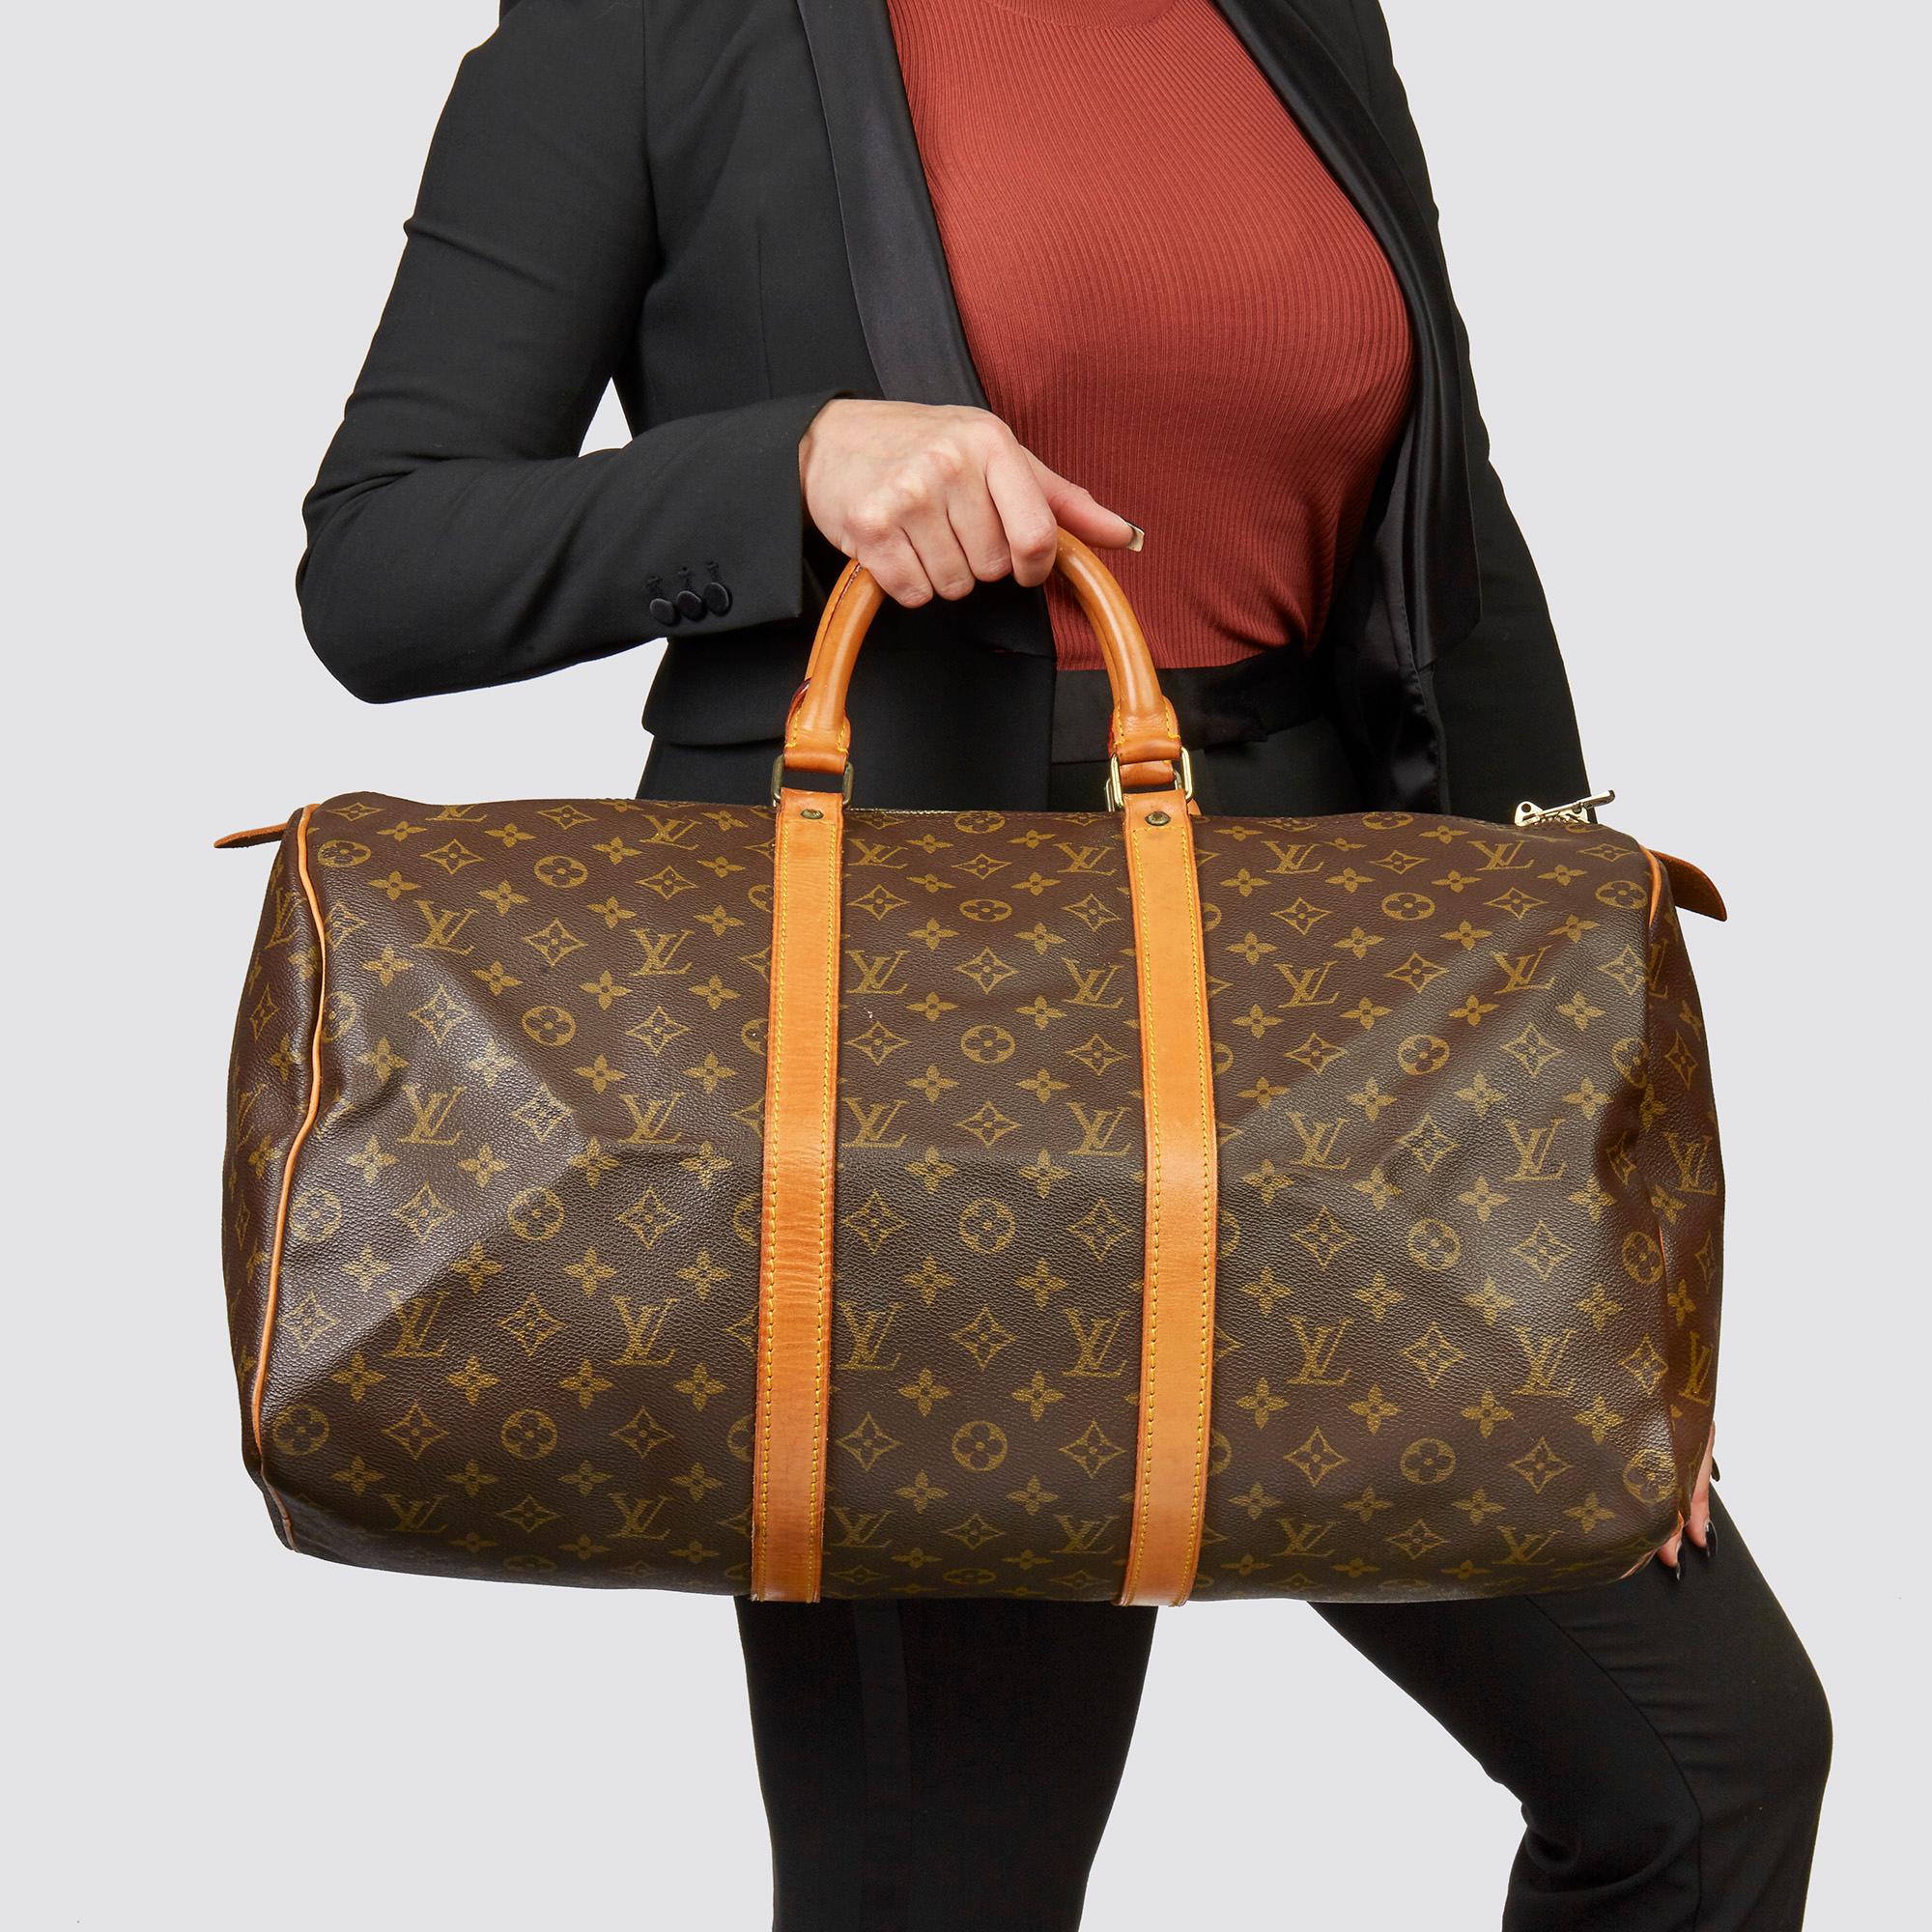 LOUIS VUITTON
Brown Monogram Coated Canvas & Vachetta Leather Vintage Keepall 50

Xupes Reference: HB3577
Serial Number: MB842
Age (Circa): 1982
Accompanied By: Handle Keeper, Luggage Tag
Authenticity Details: Date Stamp (Made in France) 
Gender: